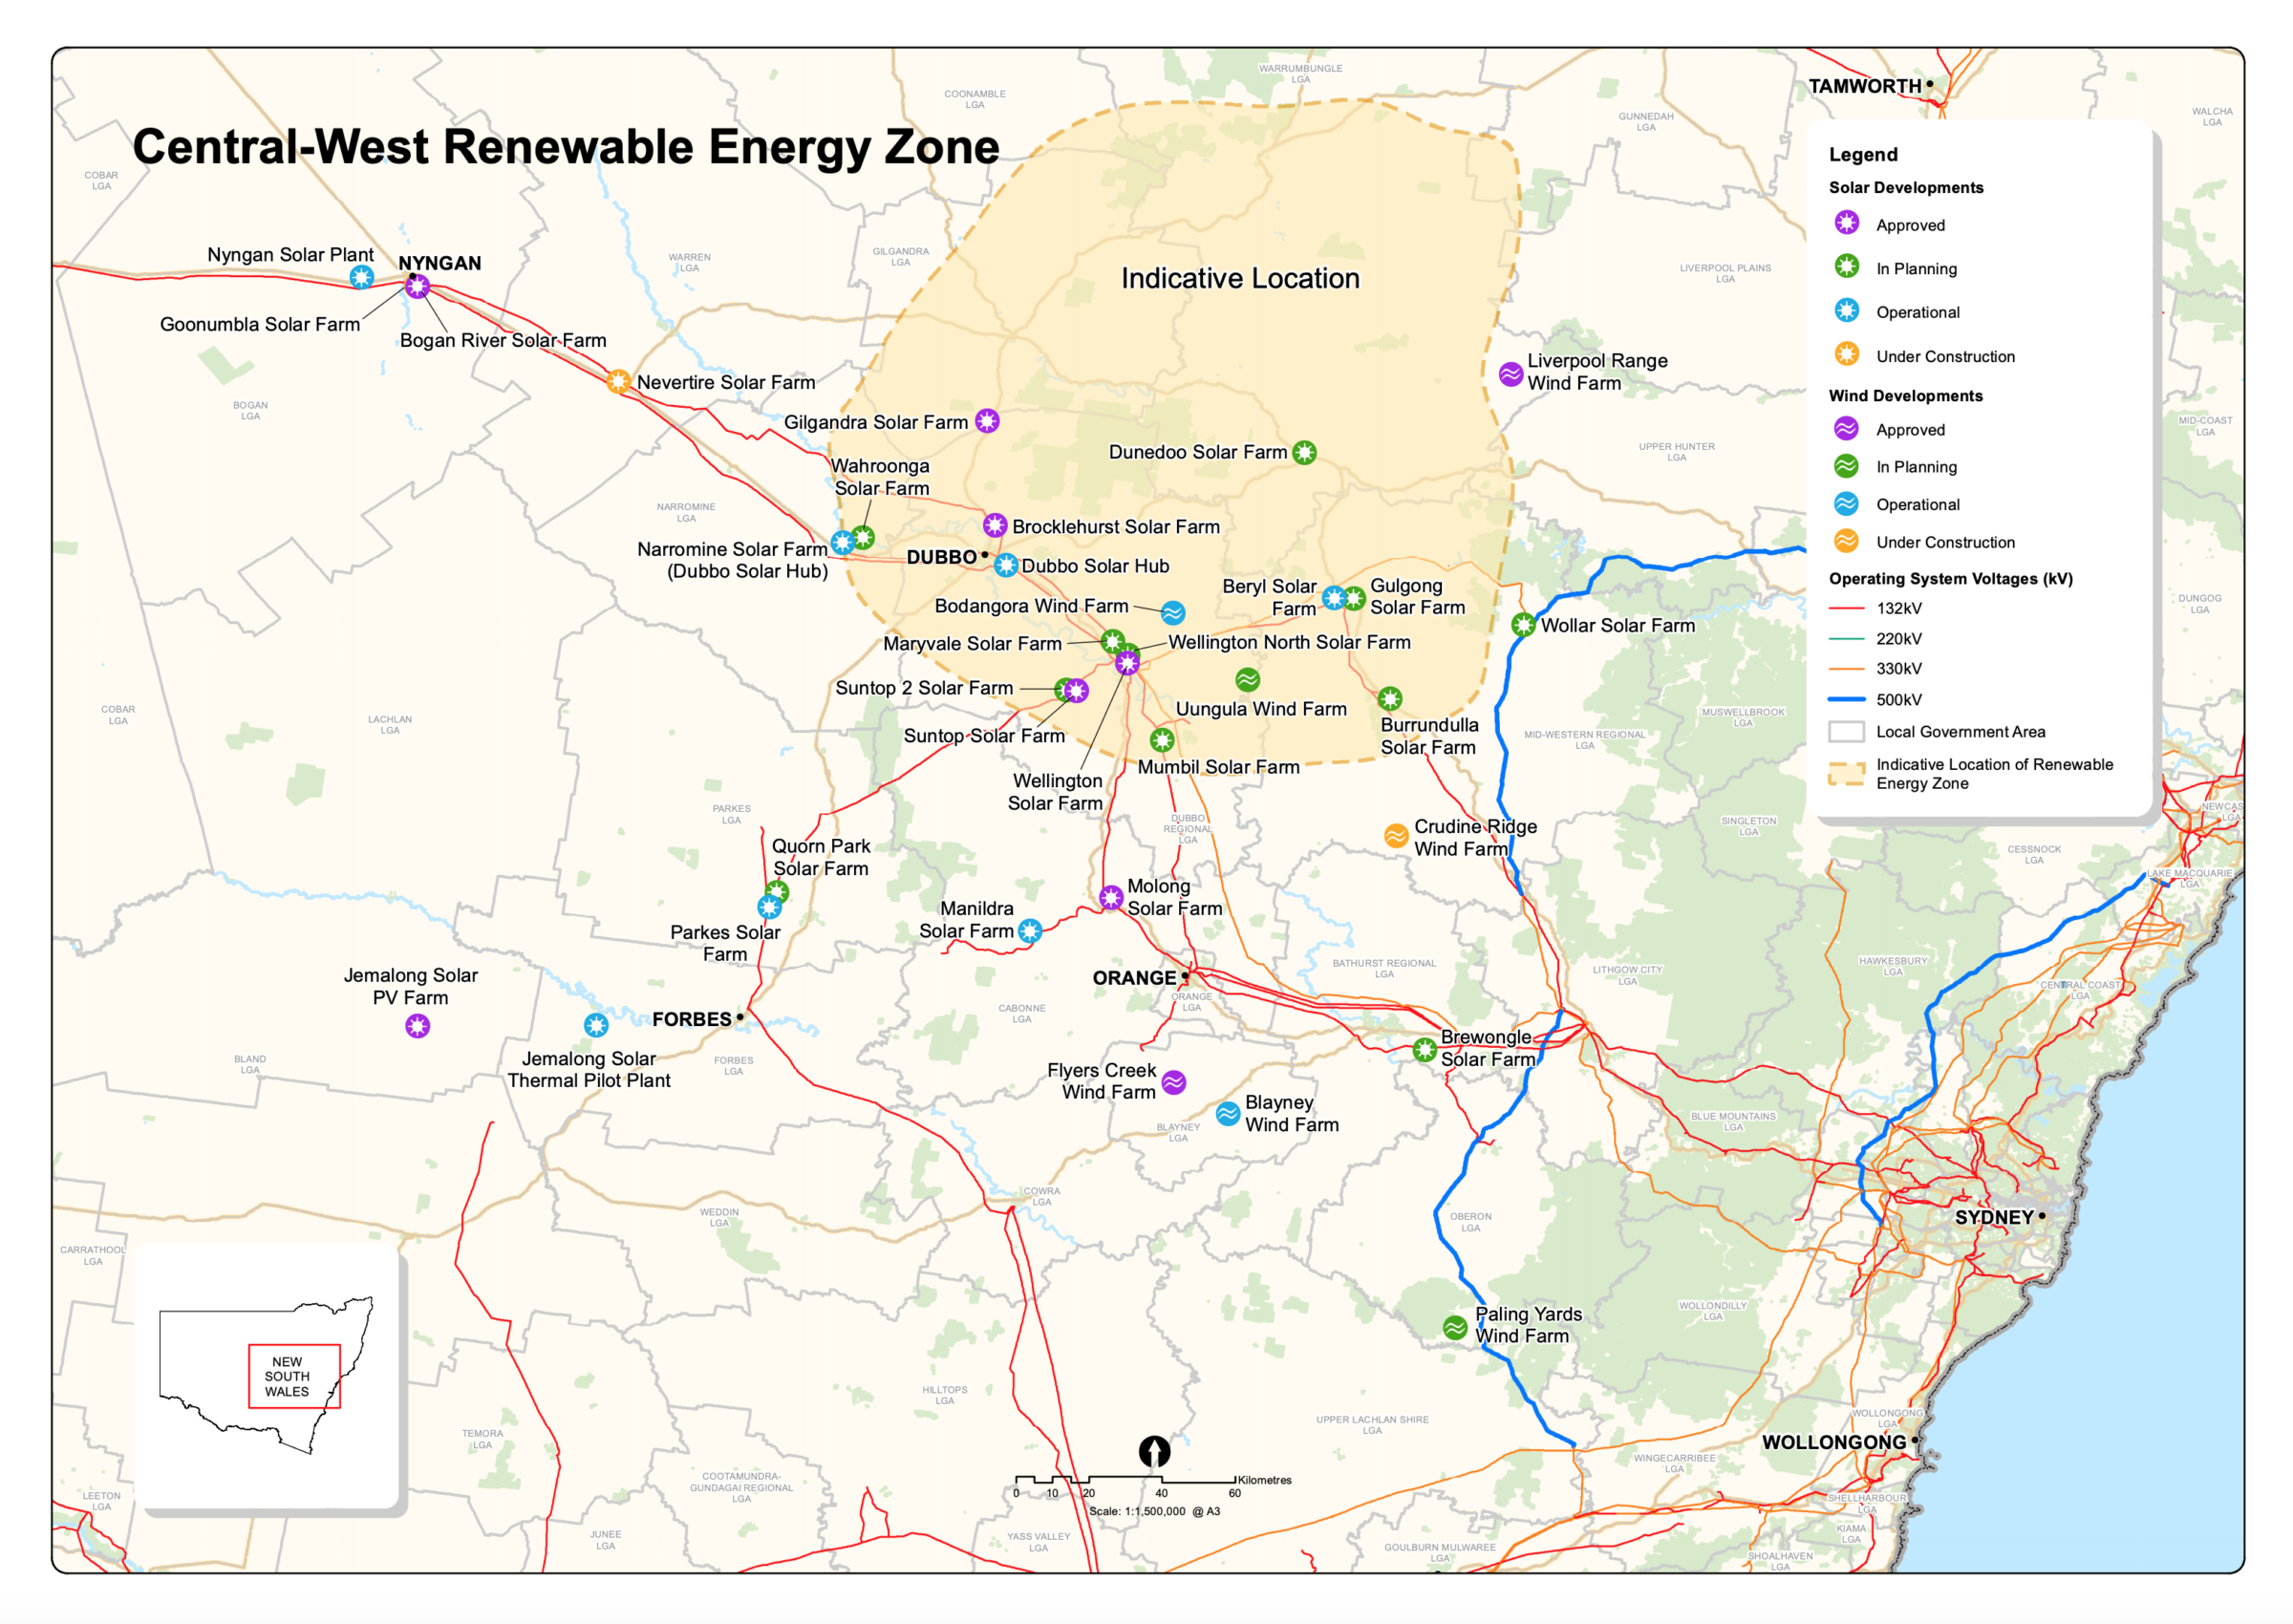 nsw-seeks-expressions-of-interest-for-3-gw-renewable-energy-zone